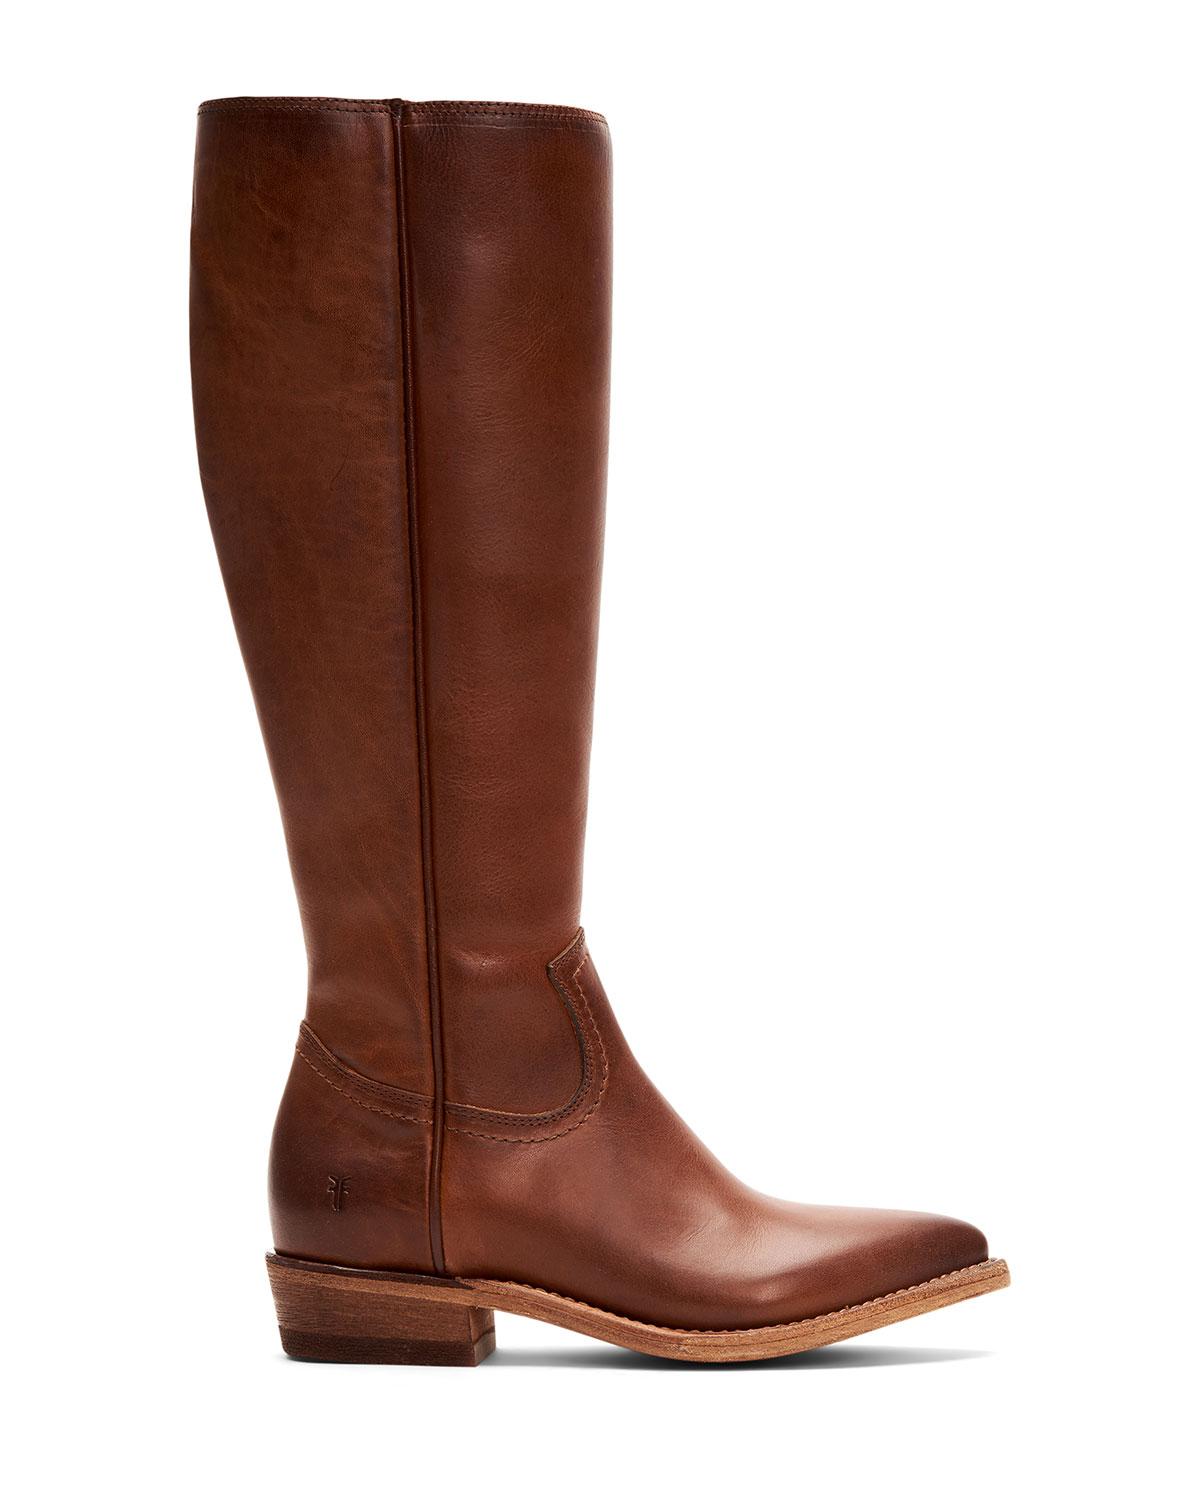 Frye Billy Zip Tall Leather Boots in Brown - Lyst